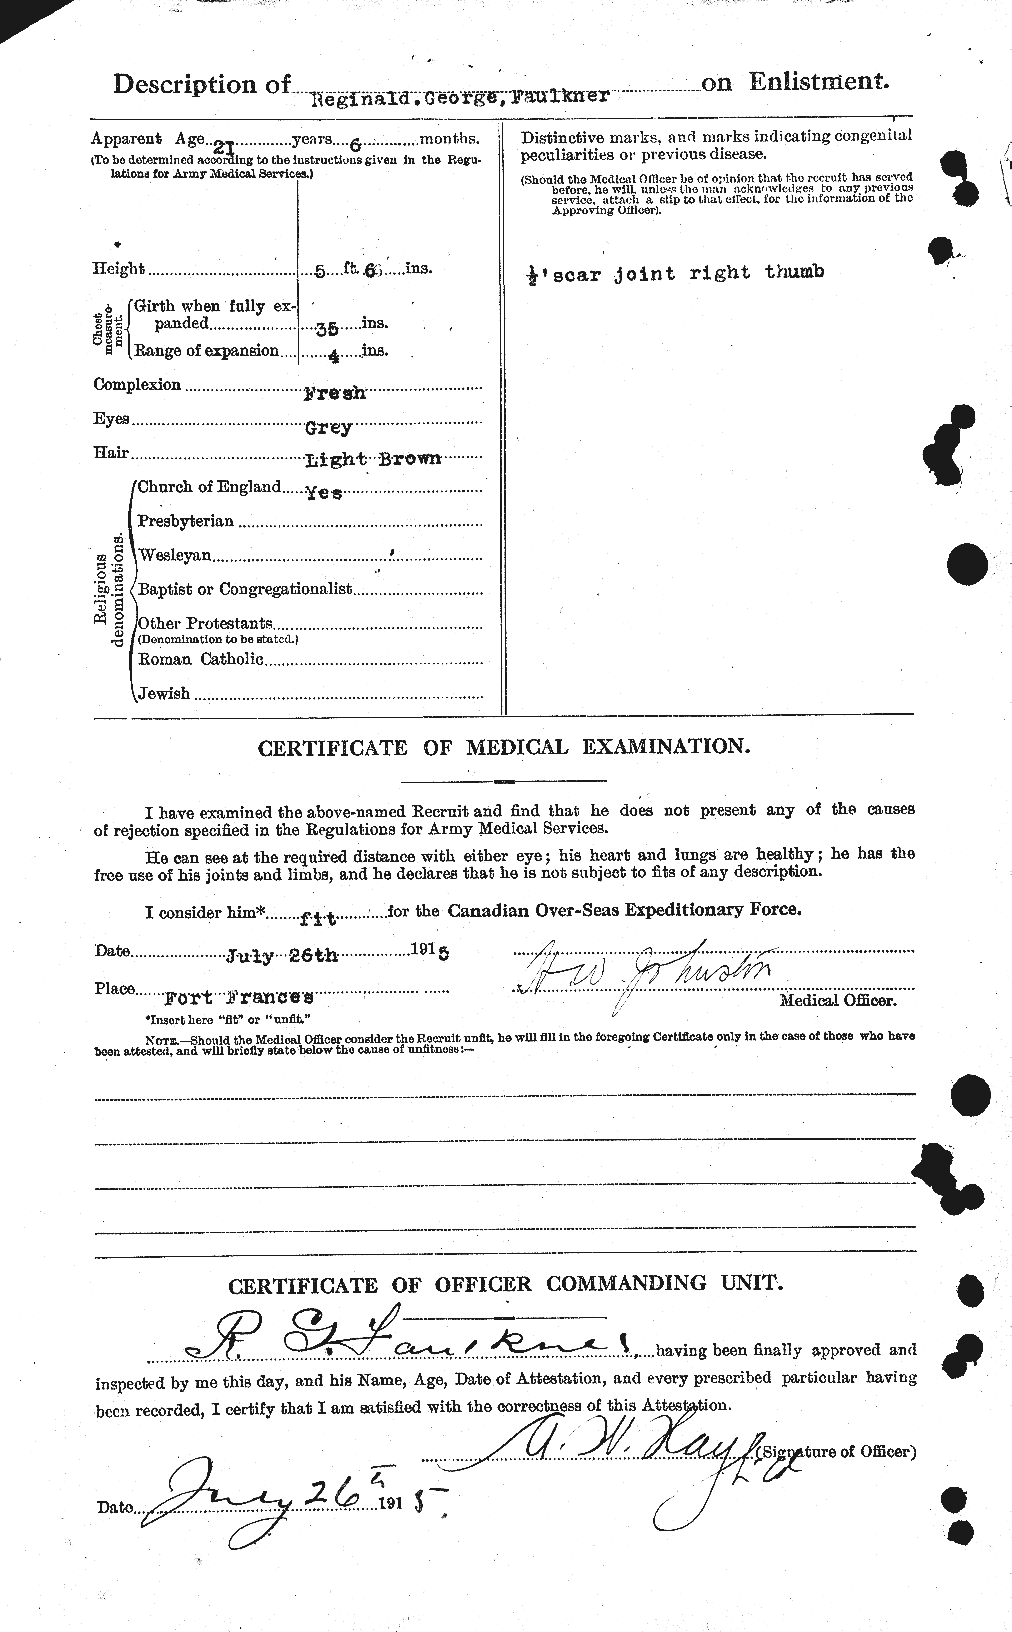 Personnel Records of the First World War - CEF 321300b